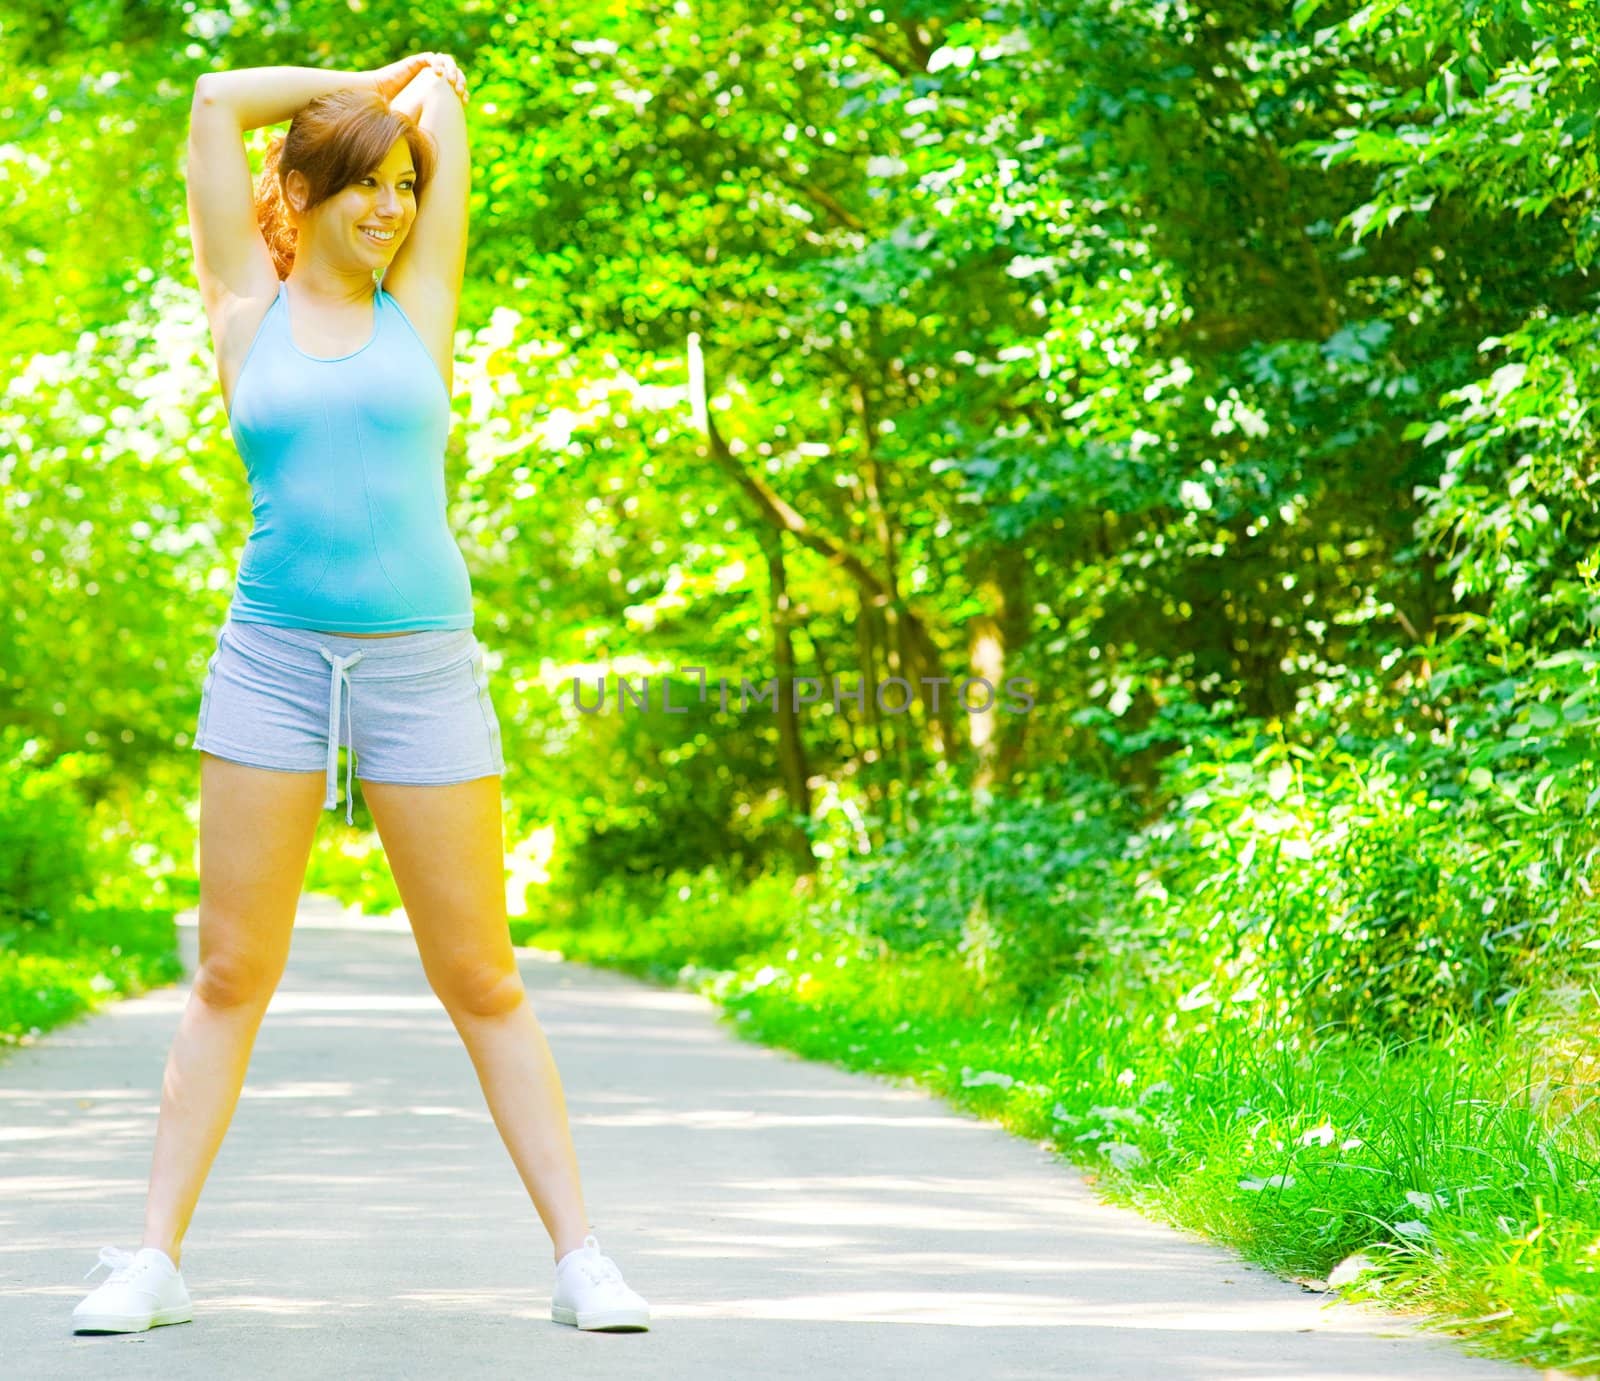 Young woman exercising, from a complete series of photos.